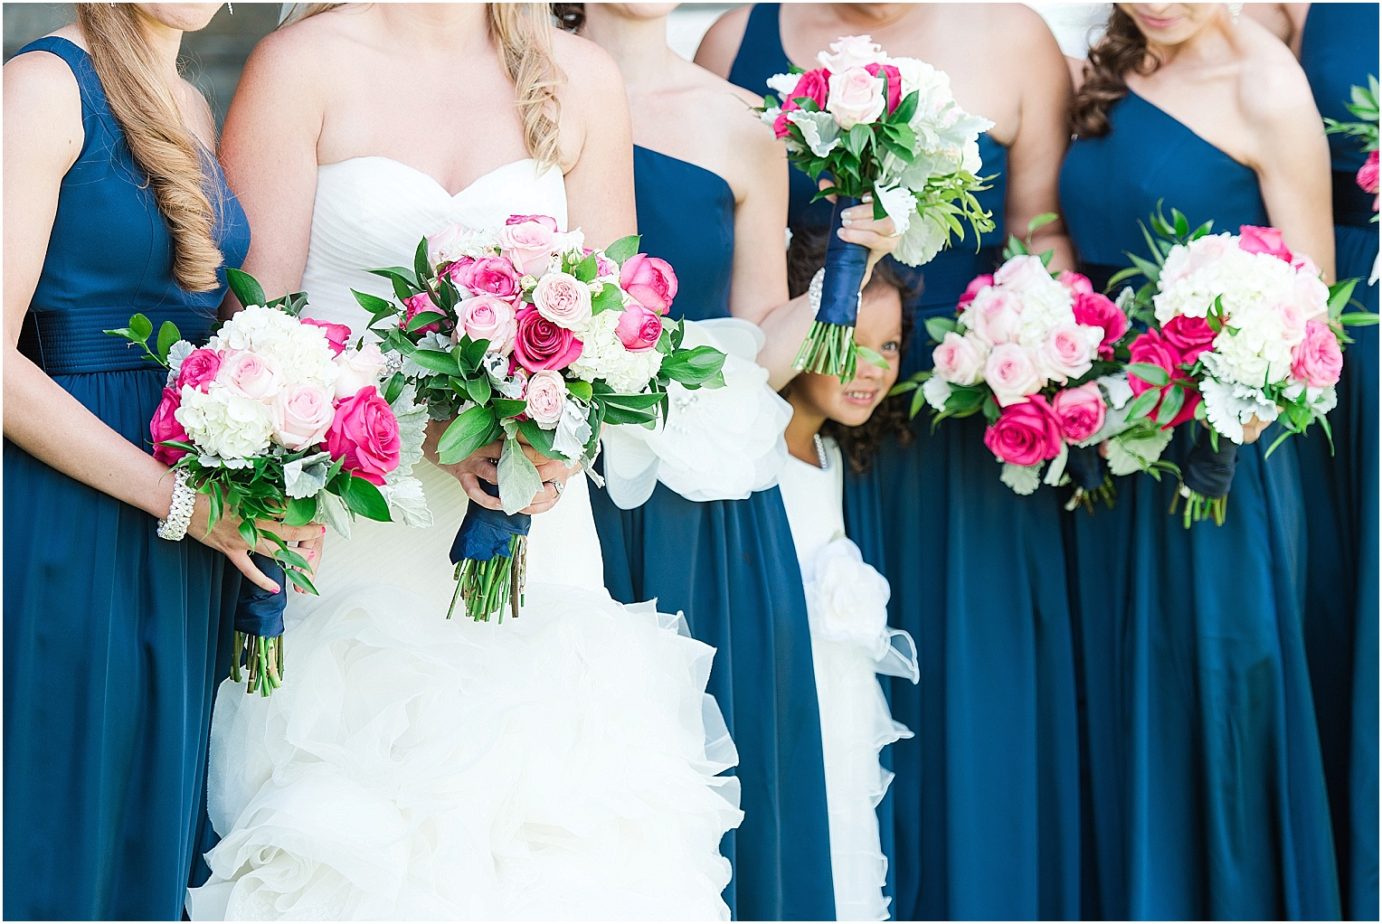 Best Wedding Bouquets of 2016 navy dresses with pink wedding florals